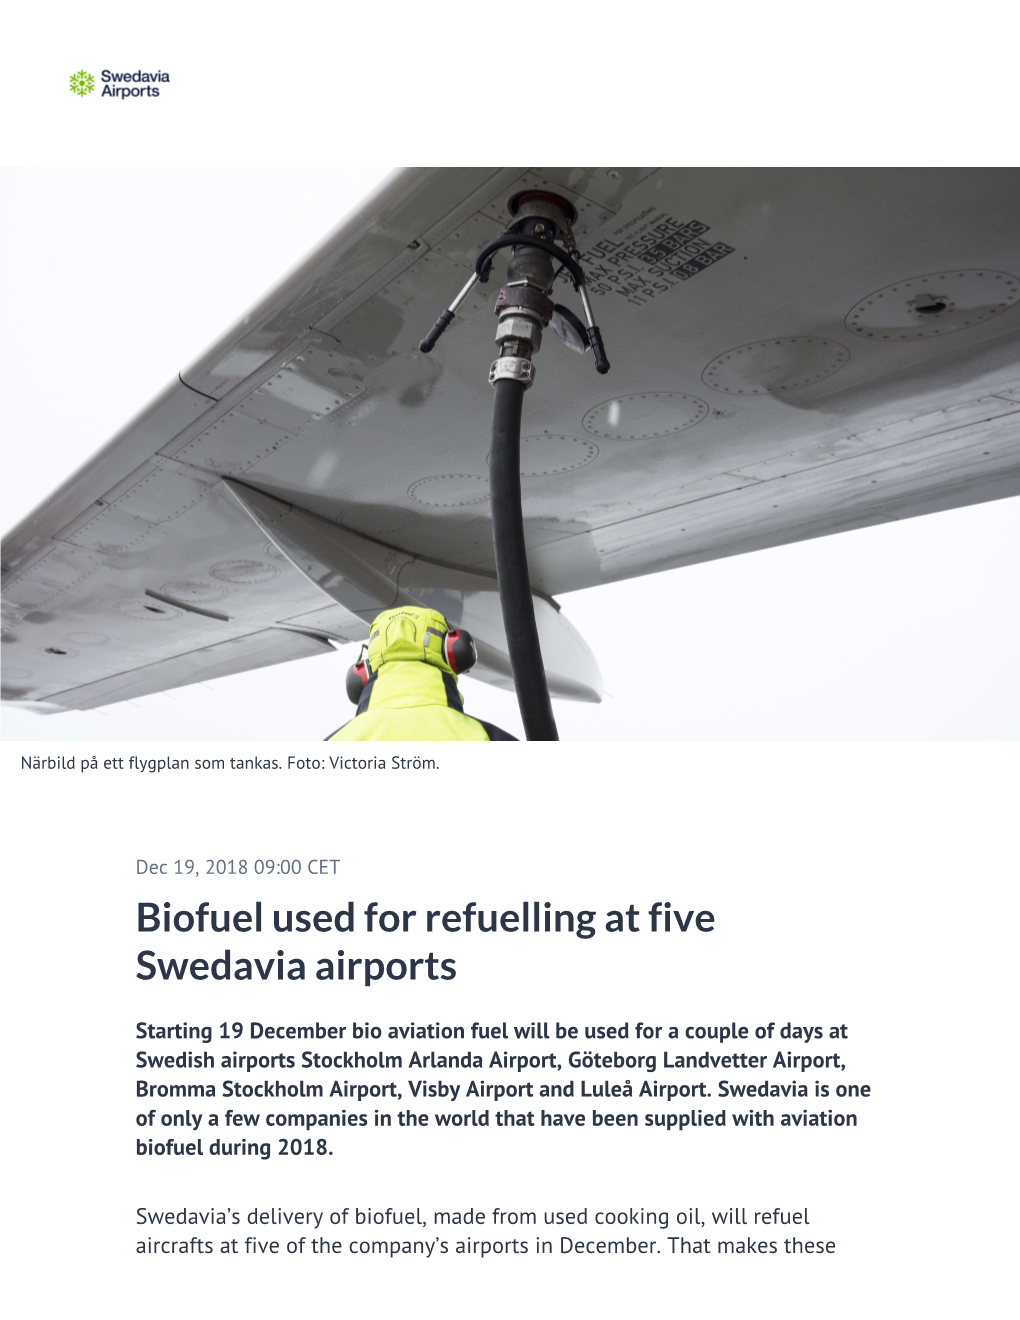 Biofuel Used for Refuelling at Five Swedavia Airports